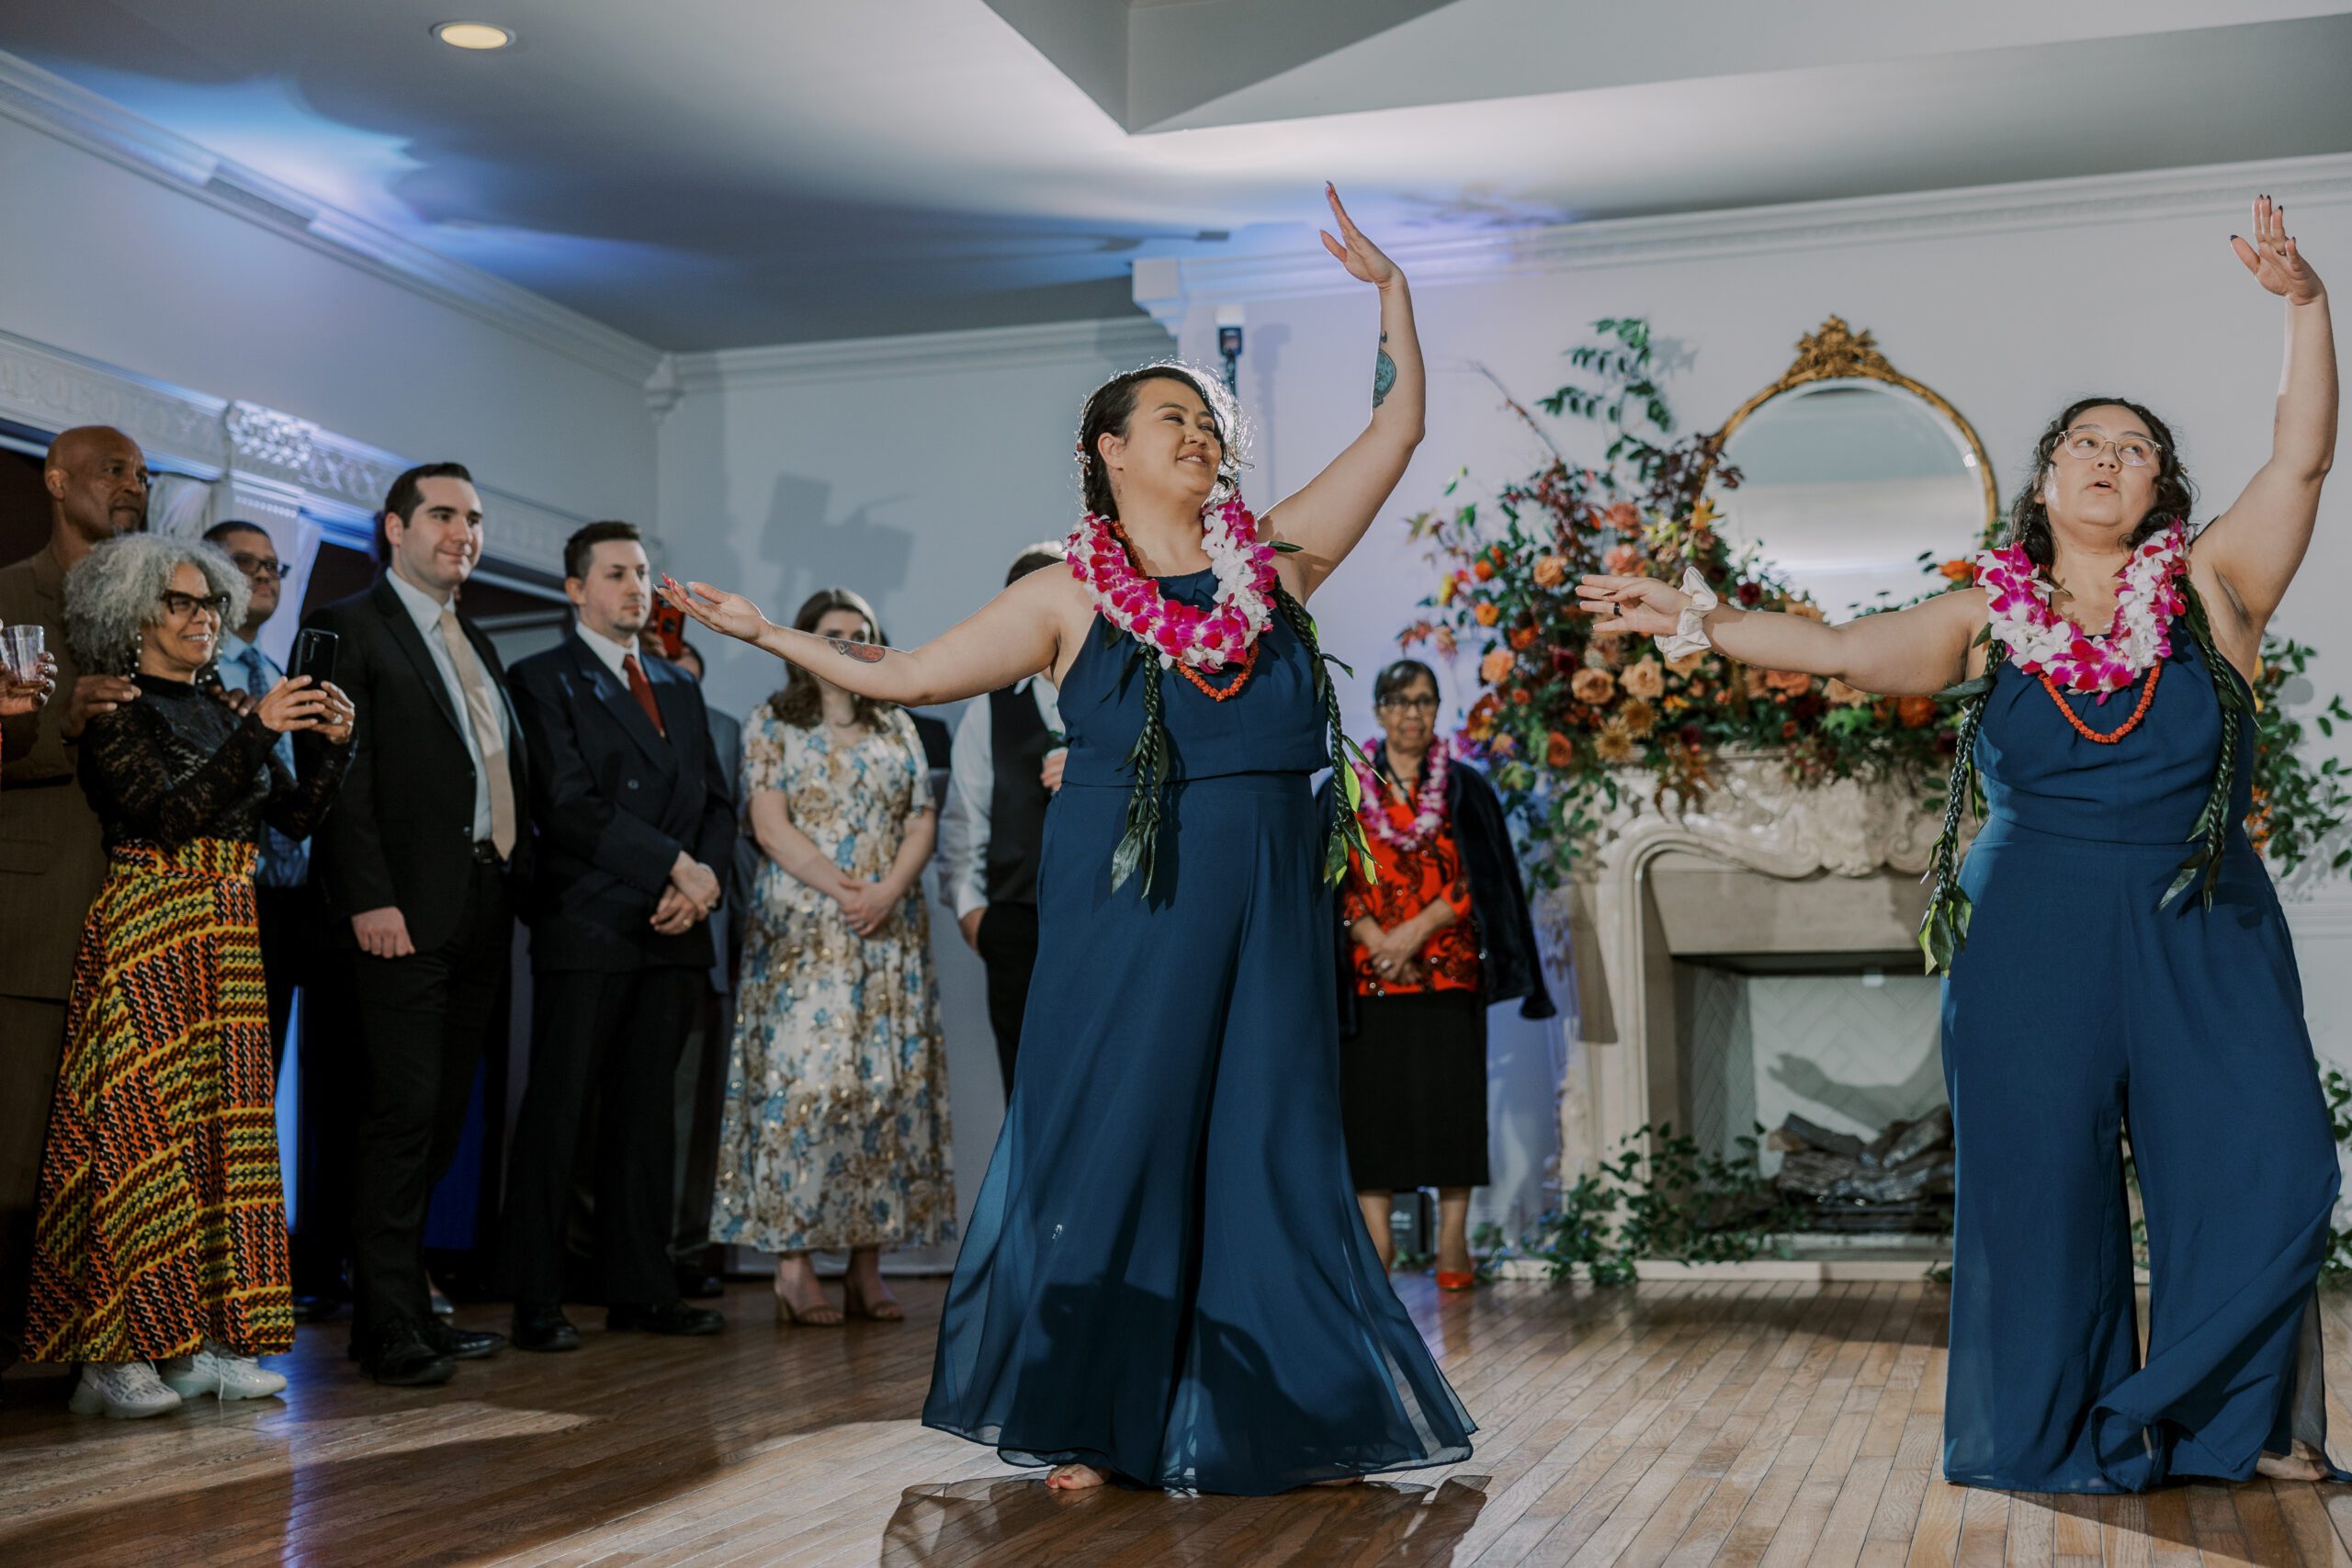 Two women in blue jumpsuits dancing in unison with their arms up, wearing leis